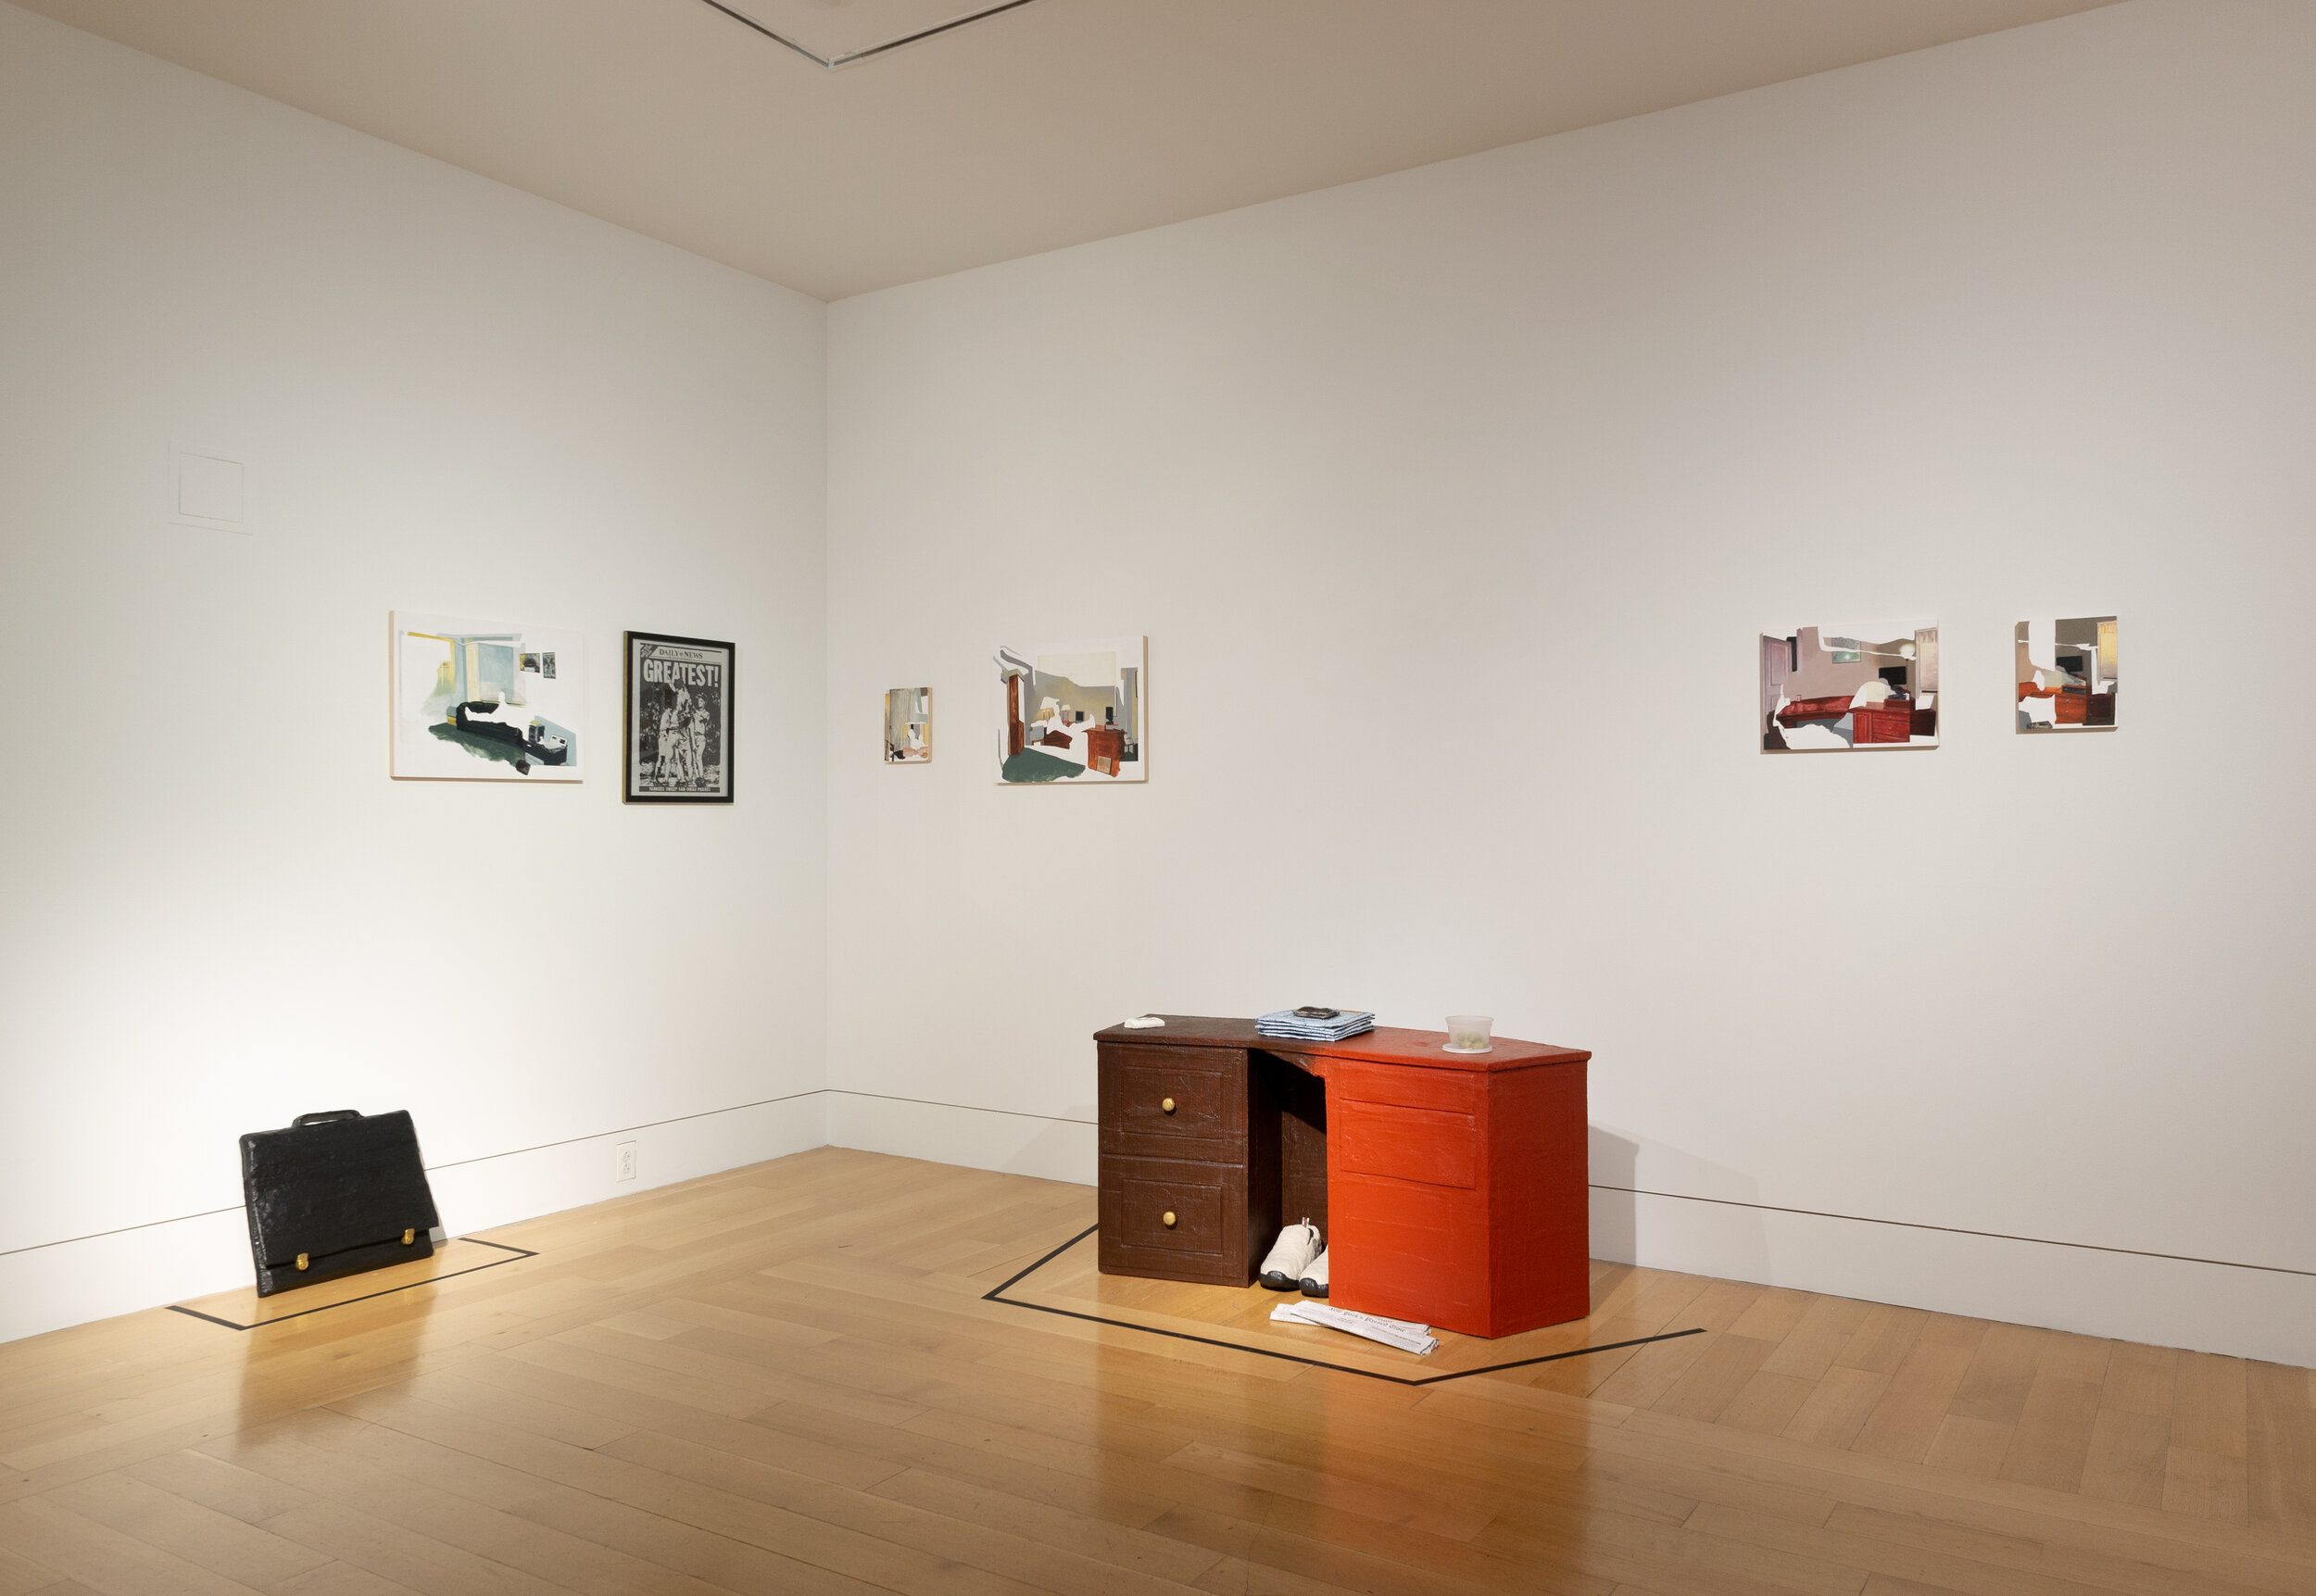 Installation view (from PAFA's 120th Annual Student Exhibition)